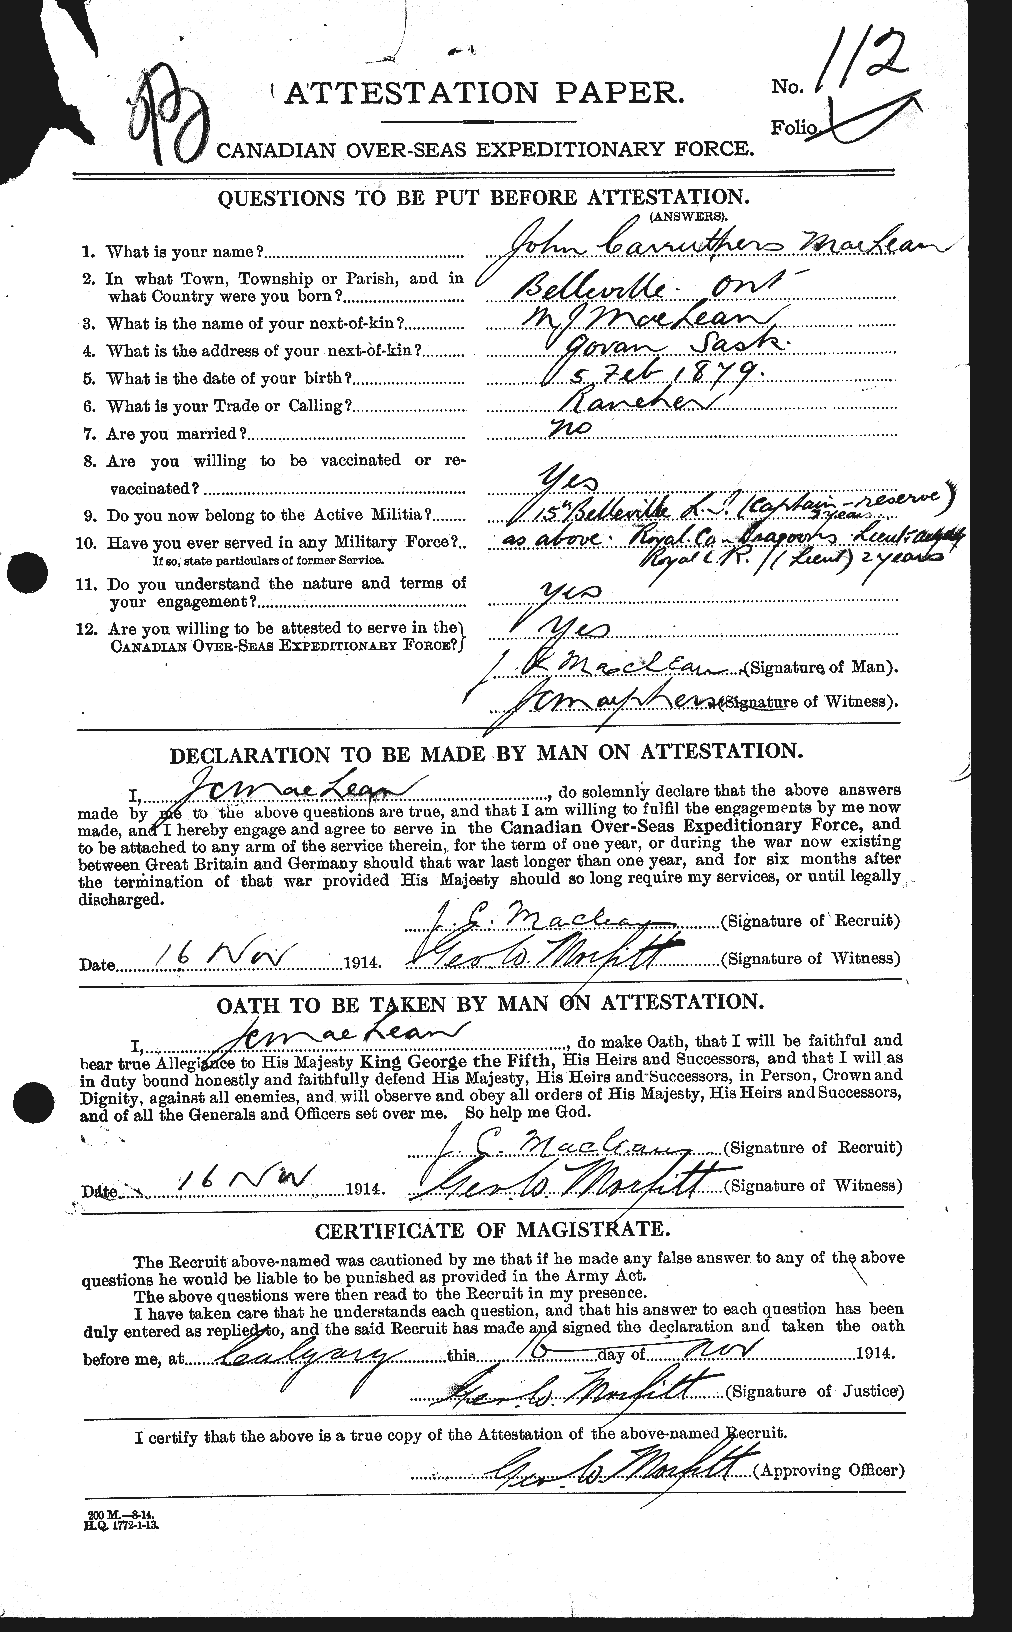 Personnel Records of the First World War - CEF 531801a